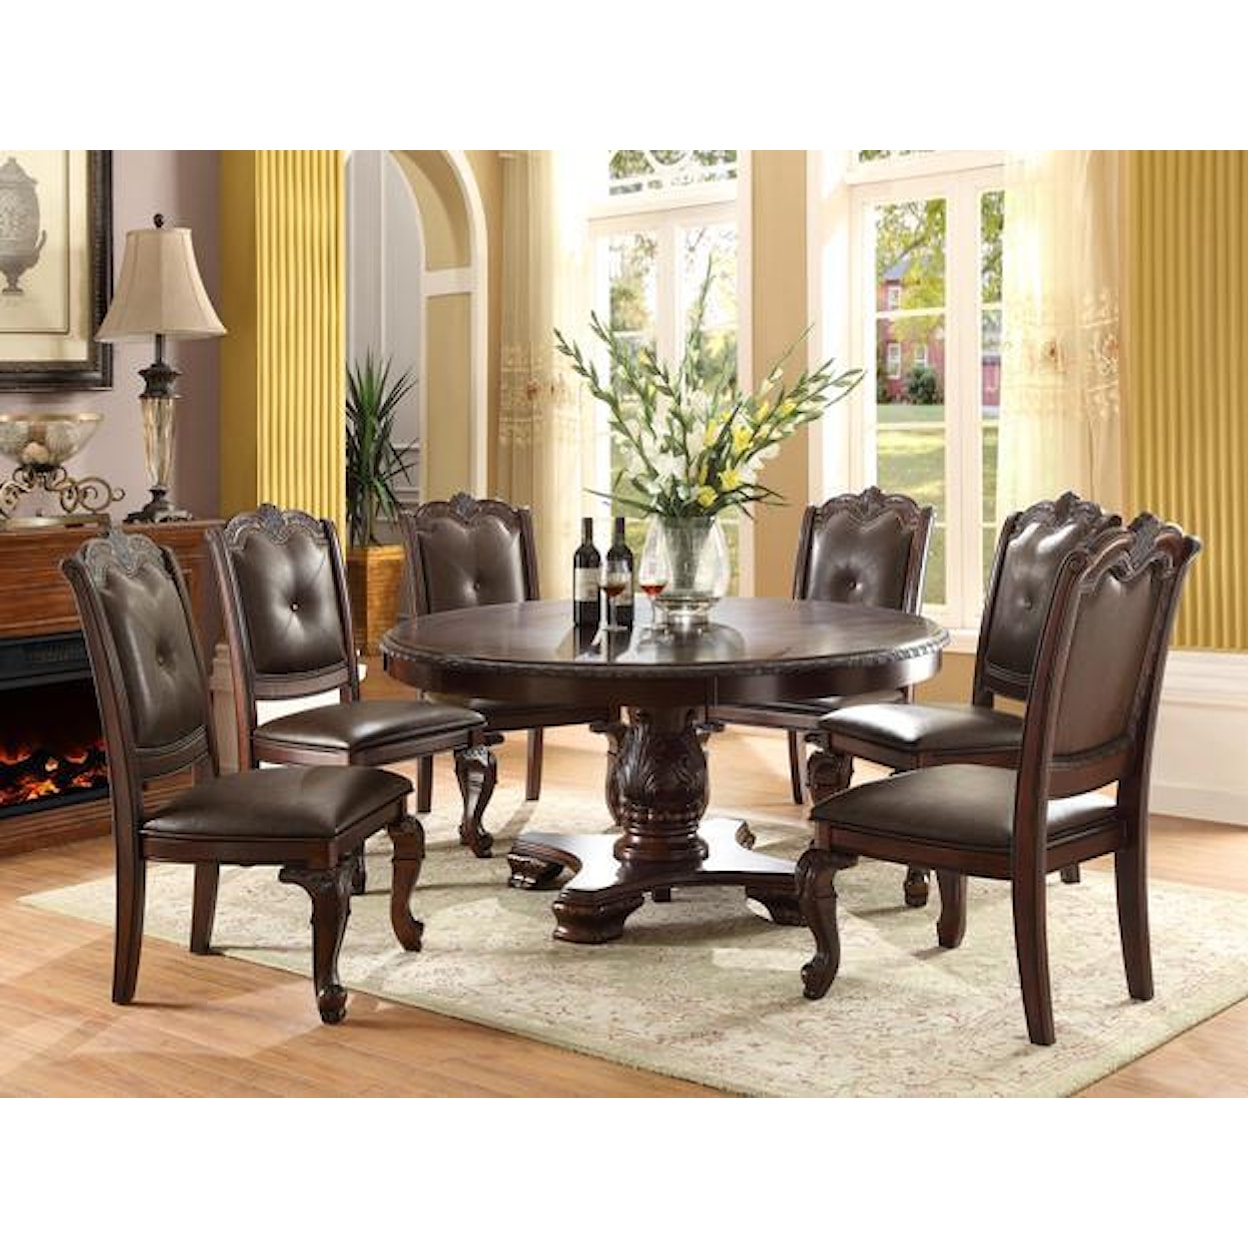 CM Kiera Round Table with Four Chairs